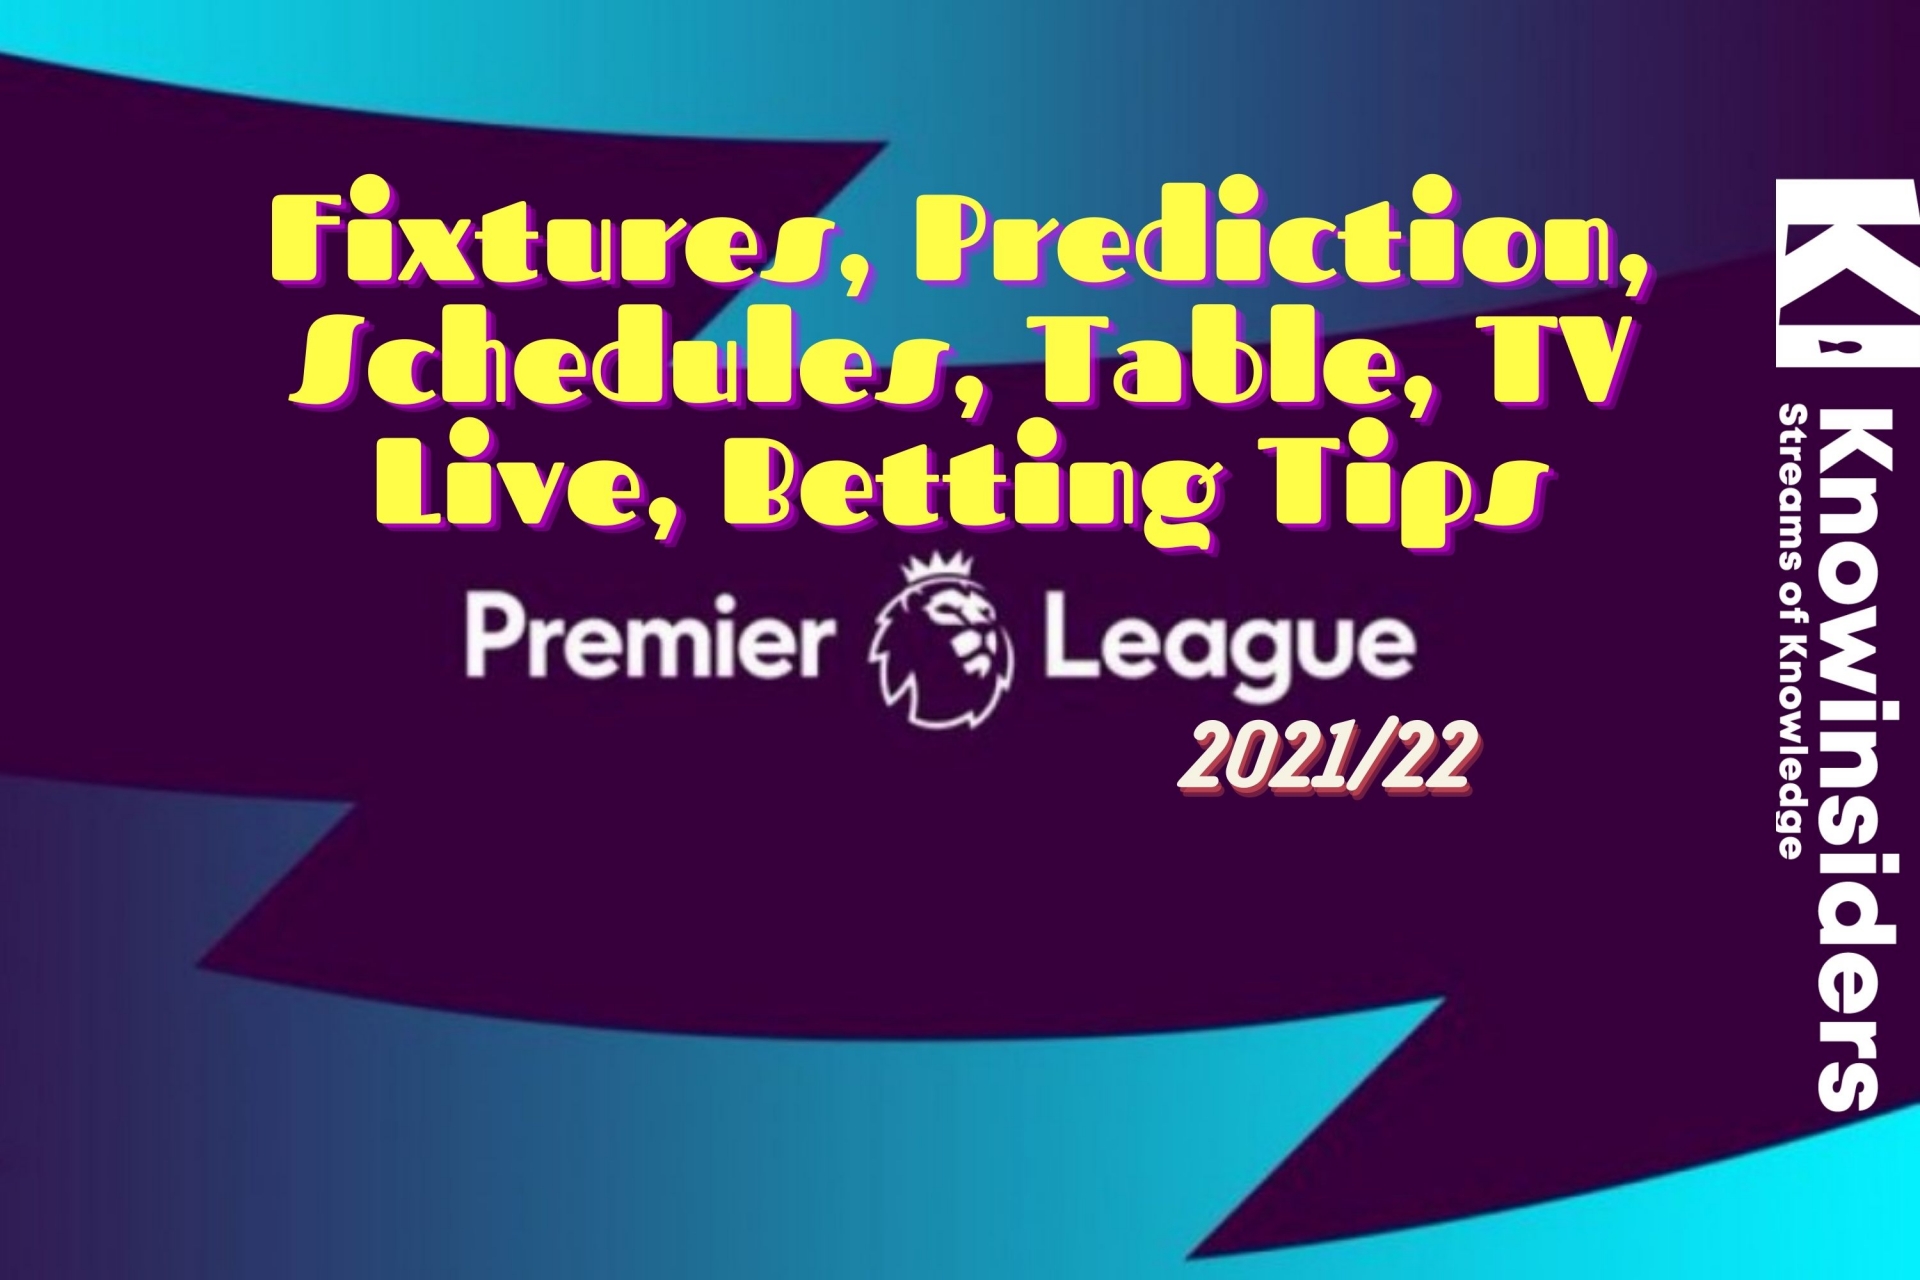 Premier League 2021/22: Fixtures in Full, List of All 20 Teams, Predictions for Winners